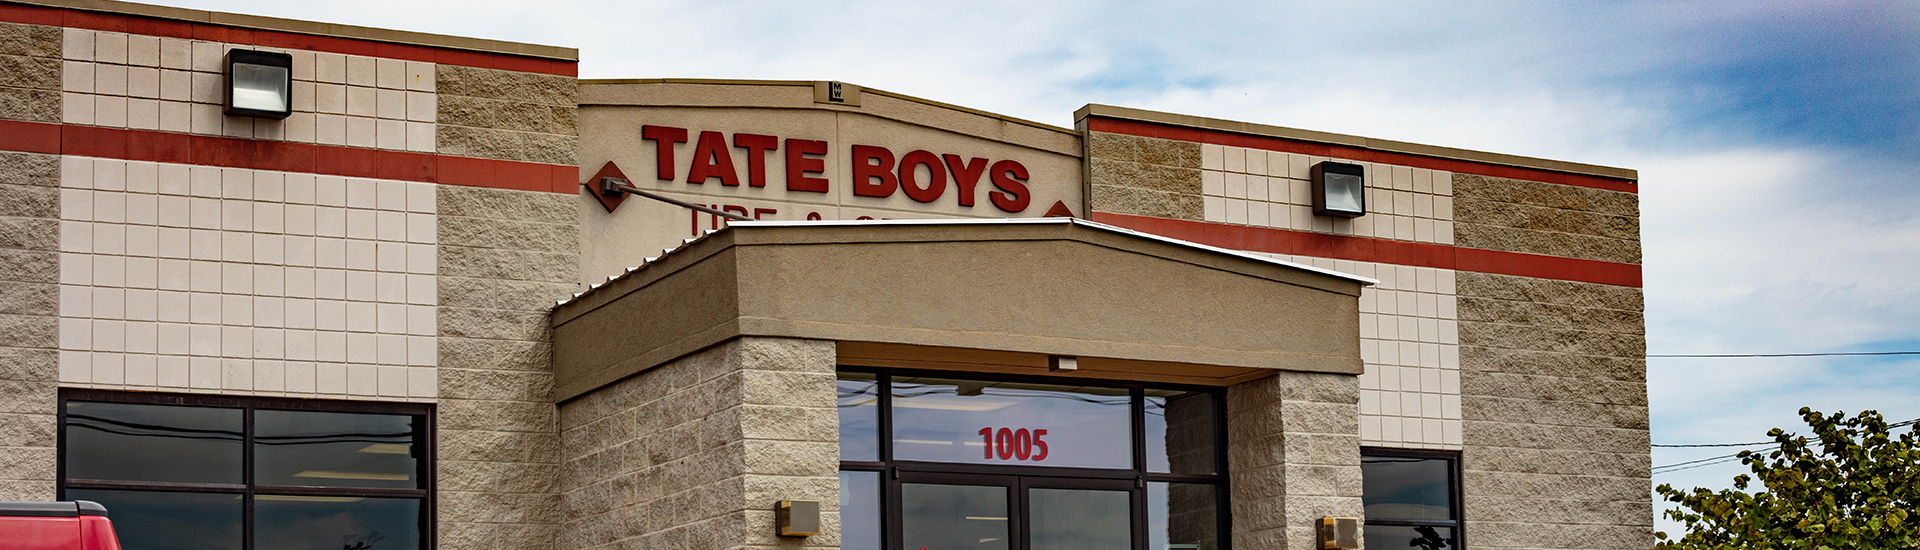 tate boys tire and service location front